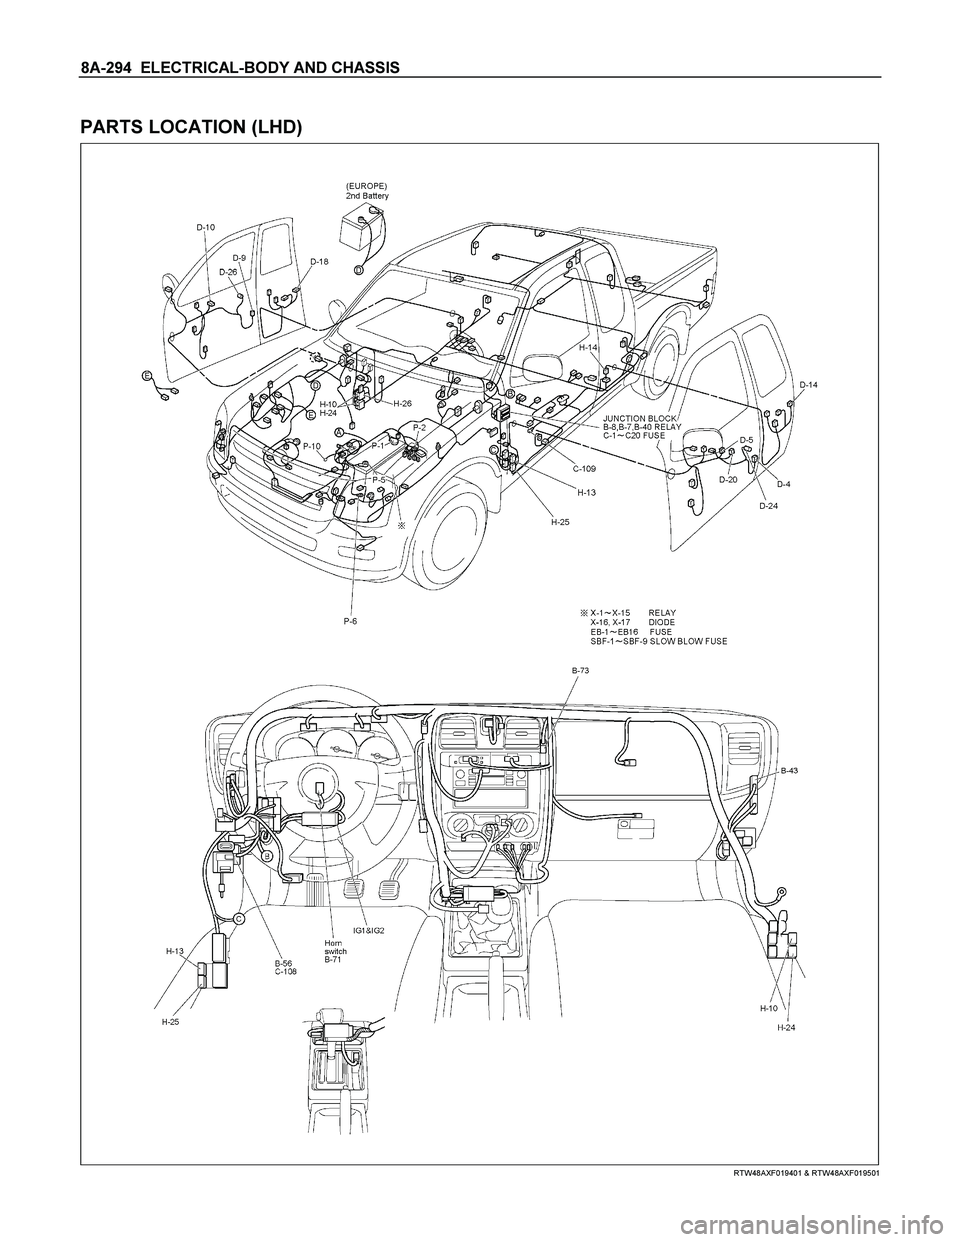 ISUZU TF SERIES 2004  Workshop Manual 8A-294  ELECTRICAL-BODY AND CHASSIS 
 
PARTS LOCATION (LHD) 
  
 
 
 
 
 
RTW48AXF019401 & RTW48AXF019501 
  